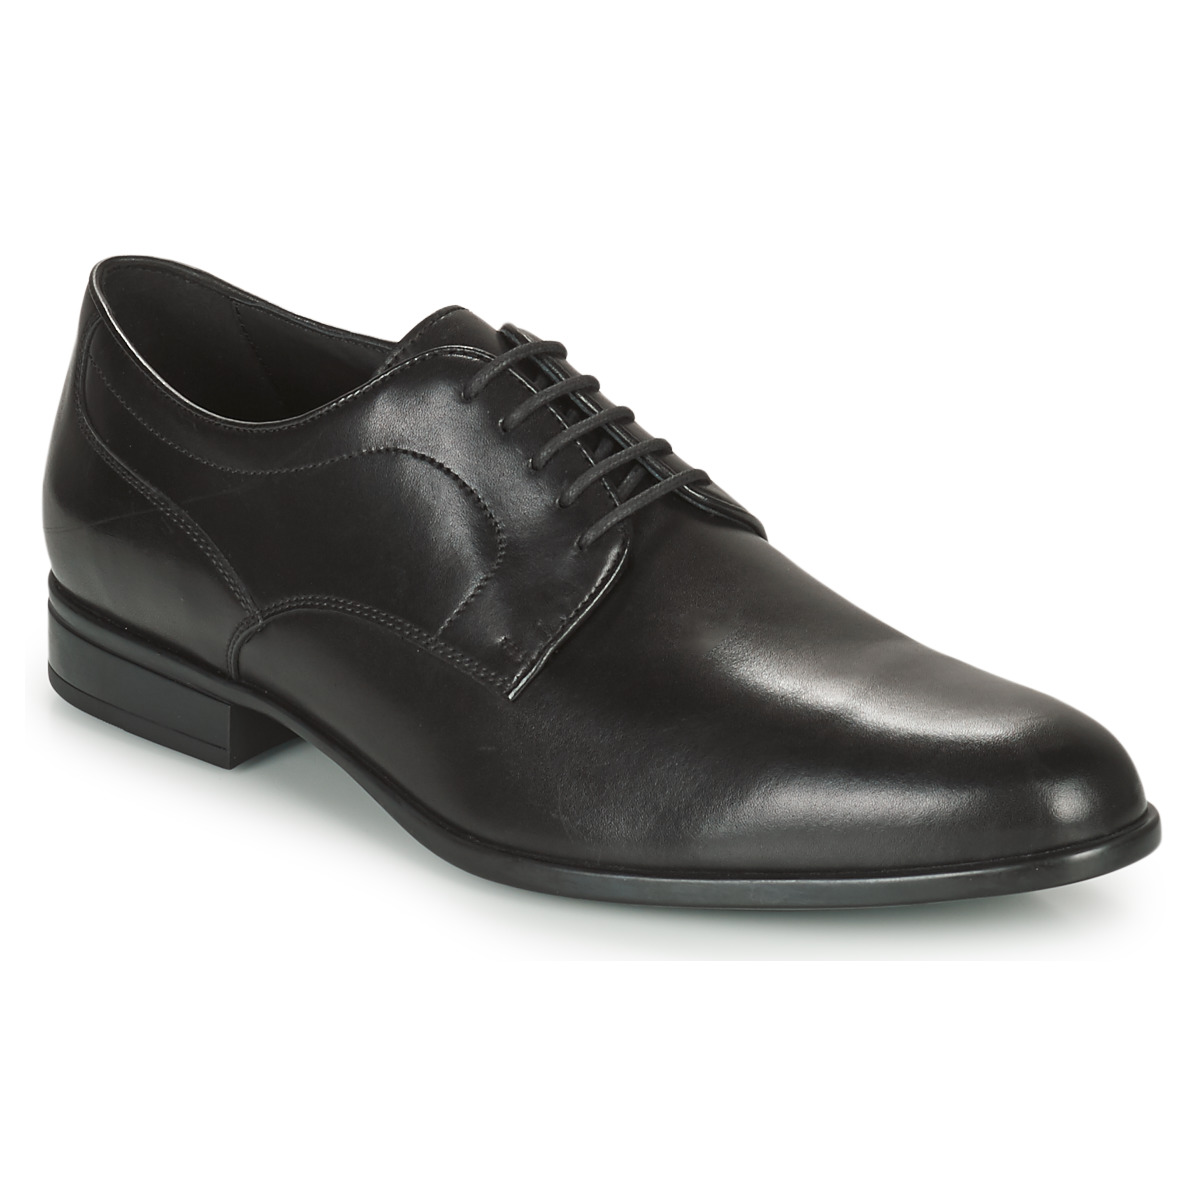 Chaussures Homme Derbies Geox IACOPO 